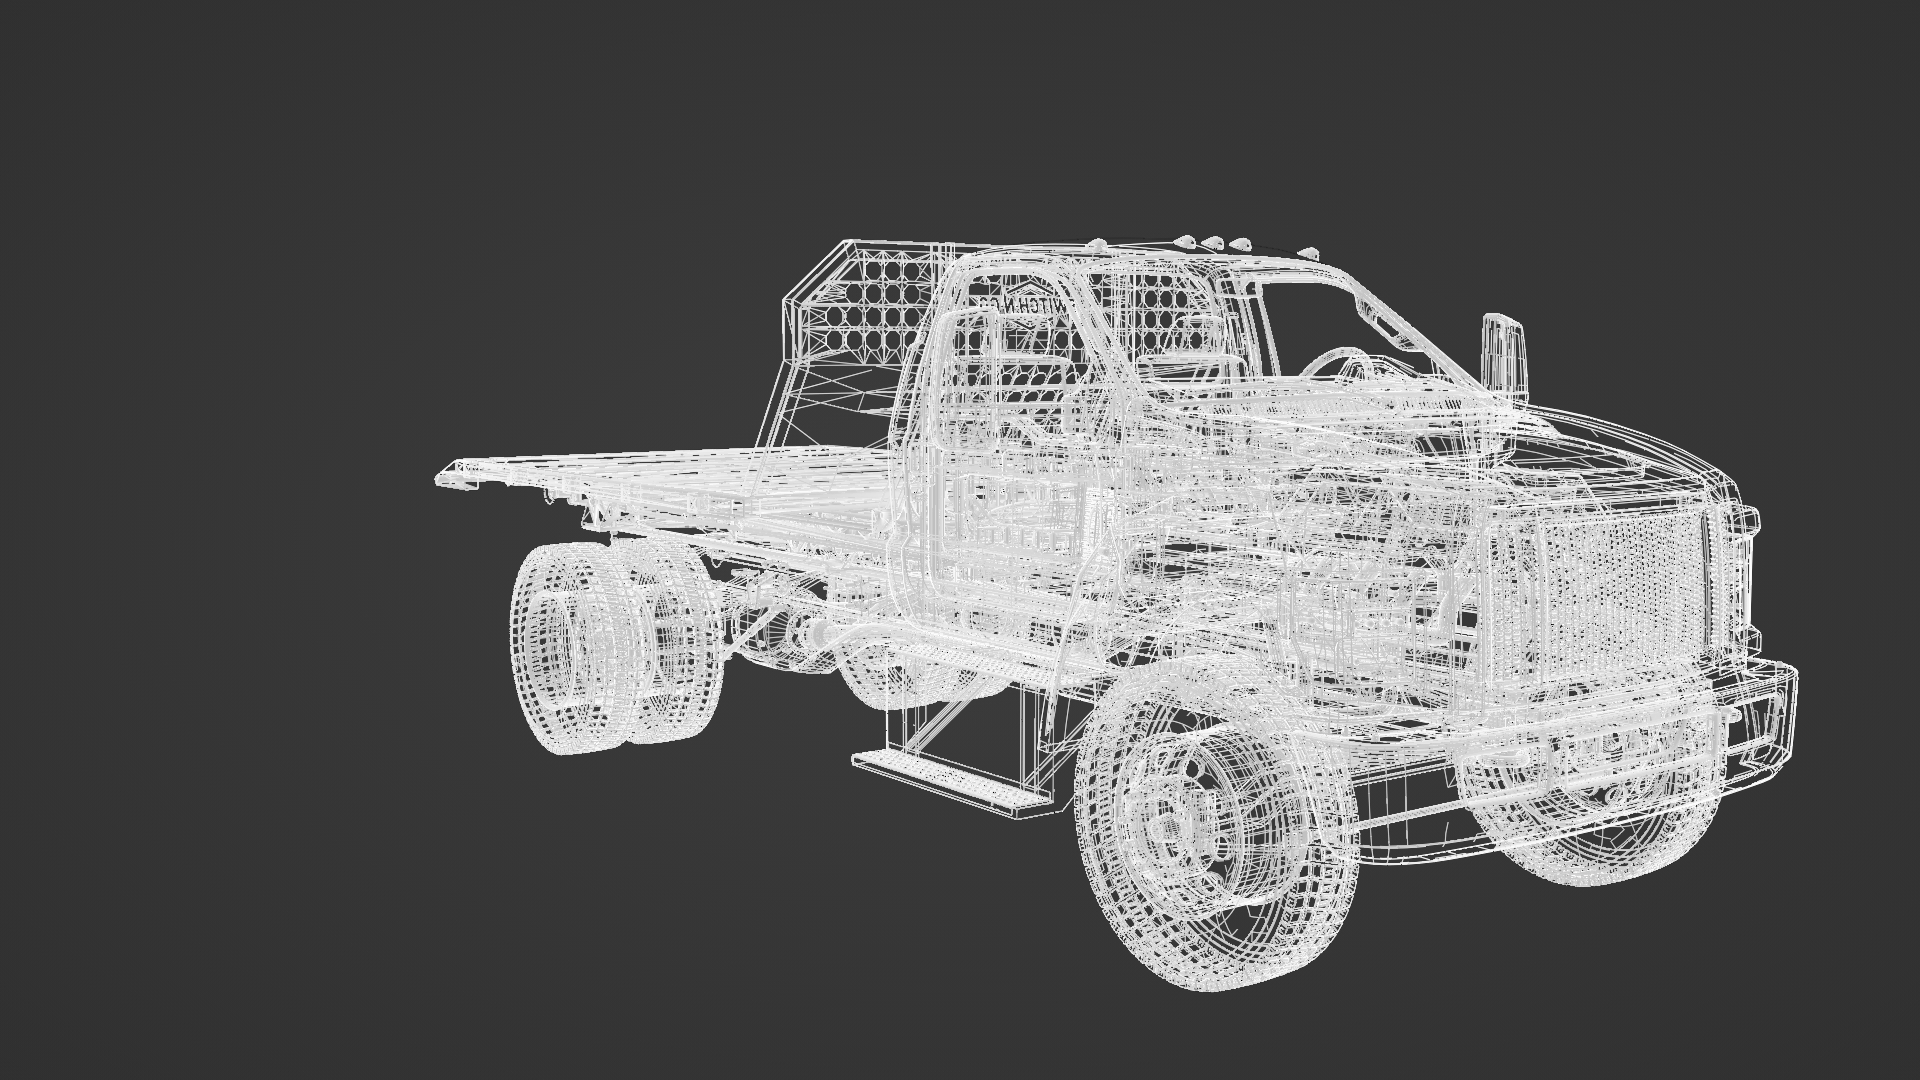 3D rendering of a truck being edited